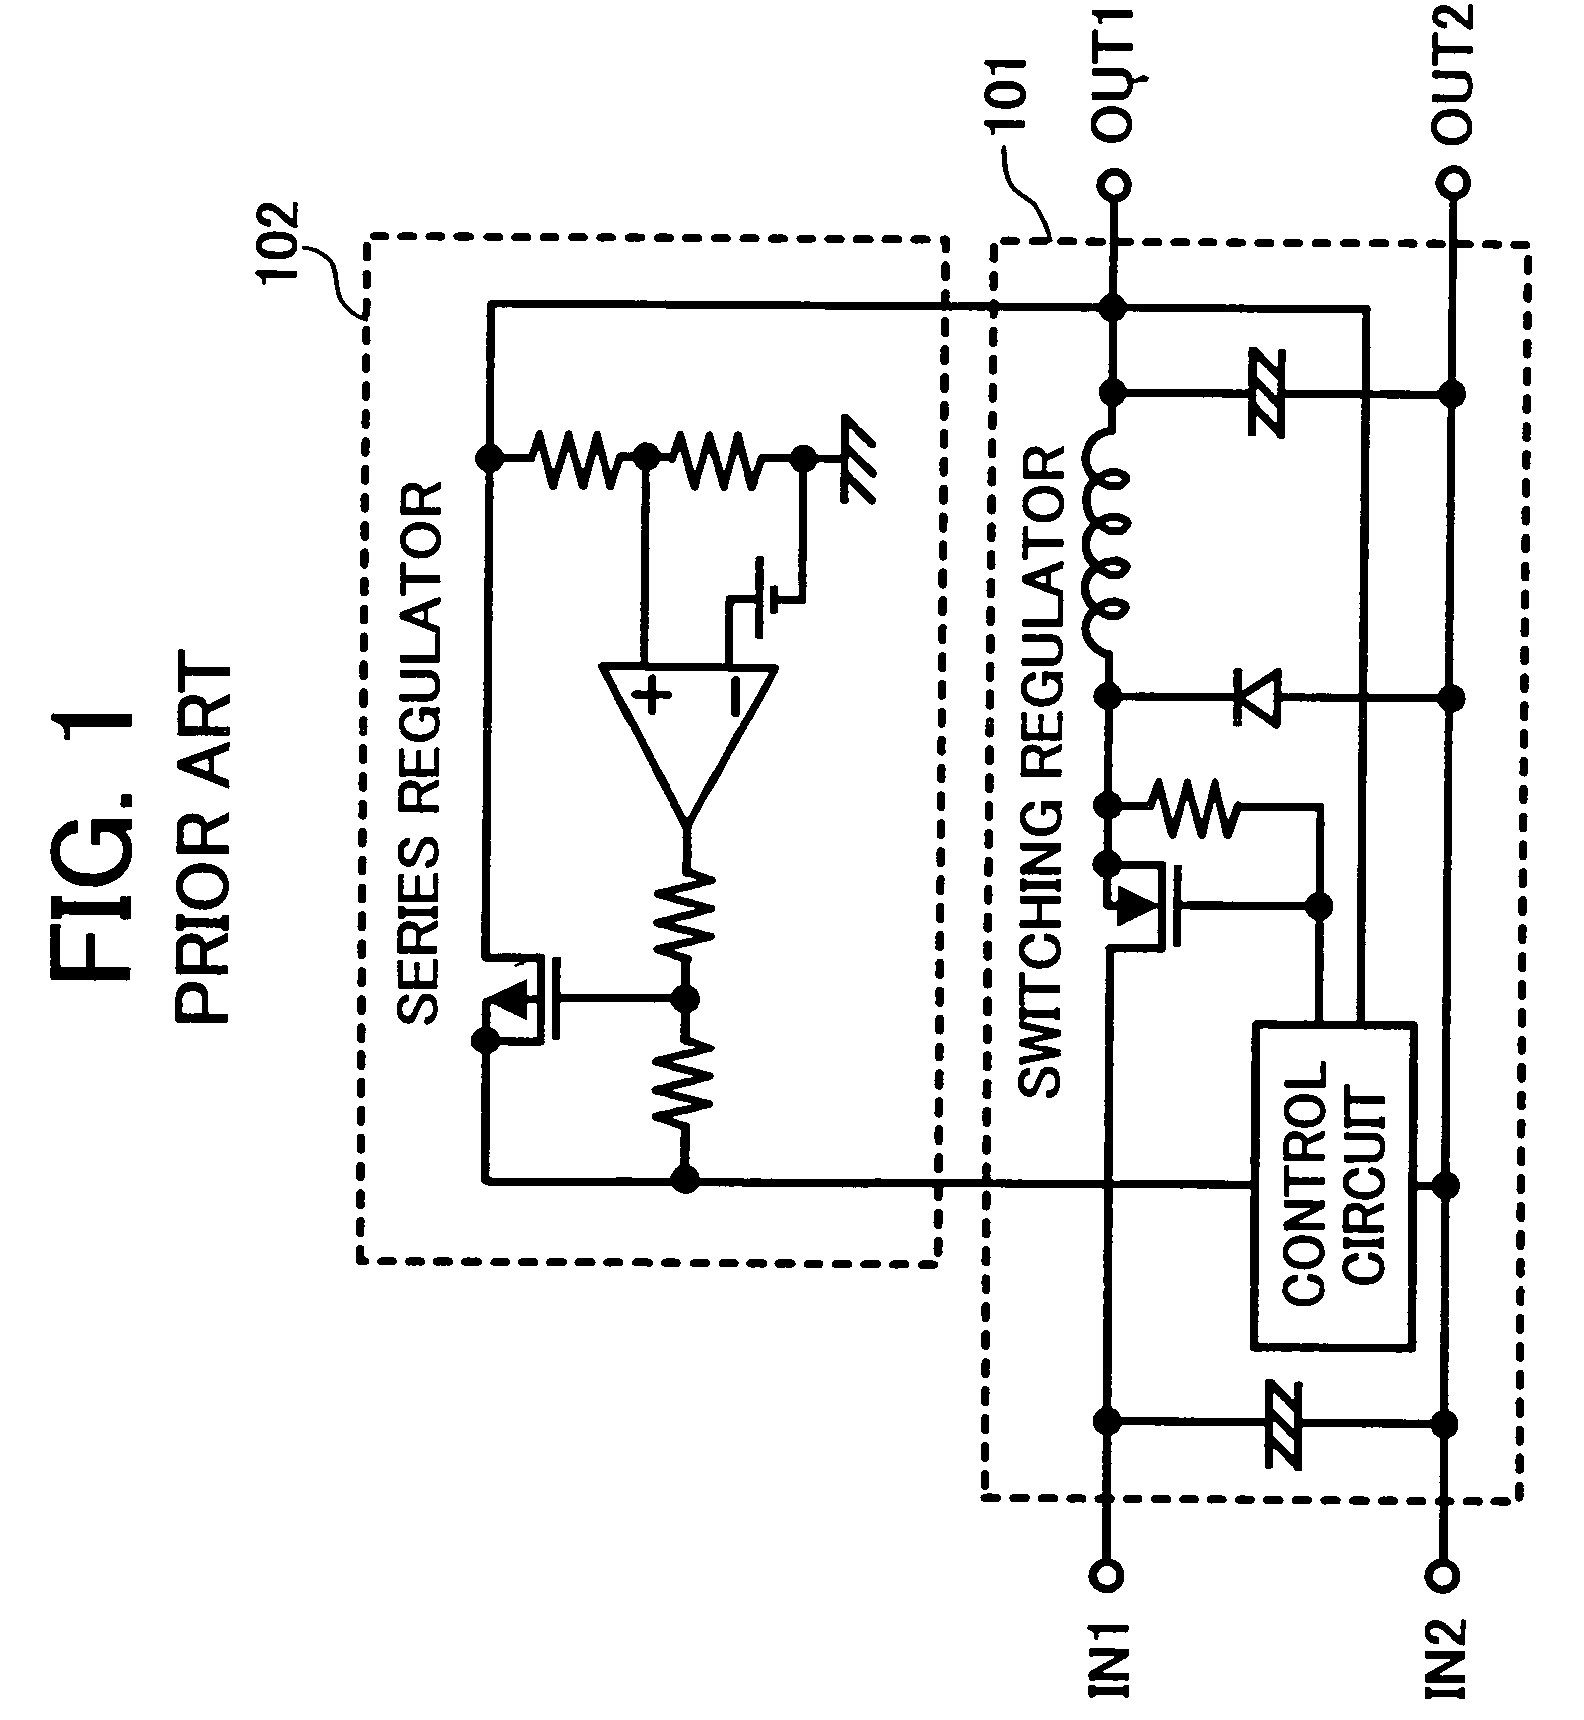 Power linear and switching regulators commonly controlled for plural loads